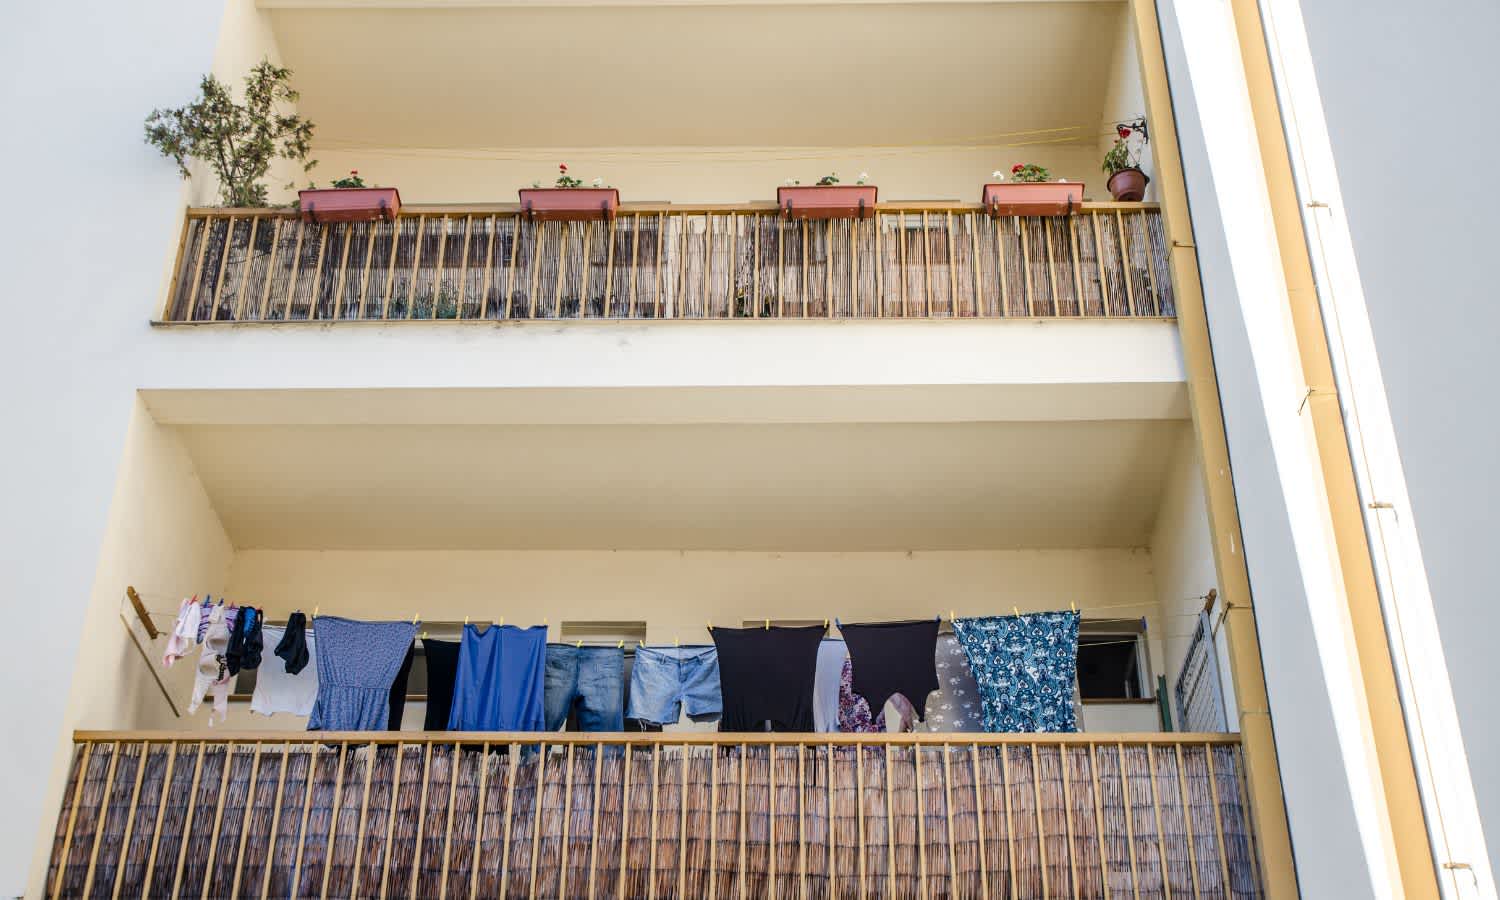 drying clothes in the balcony